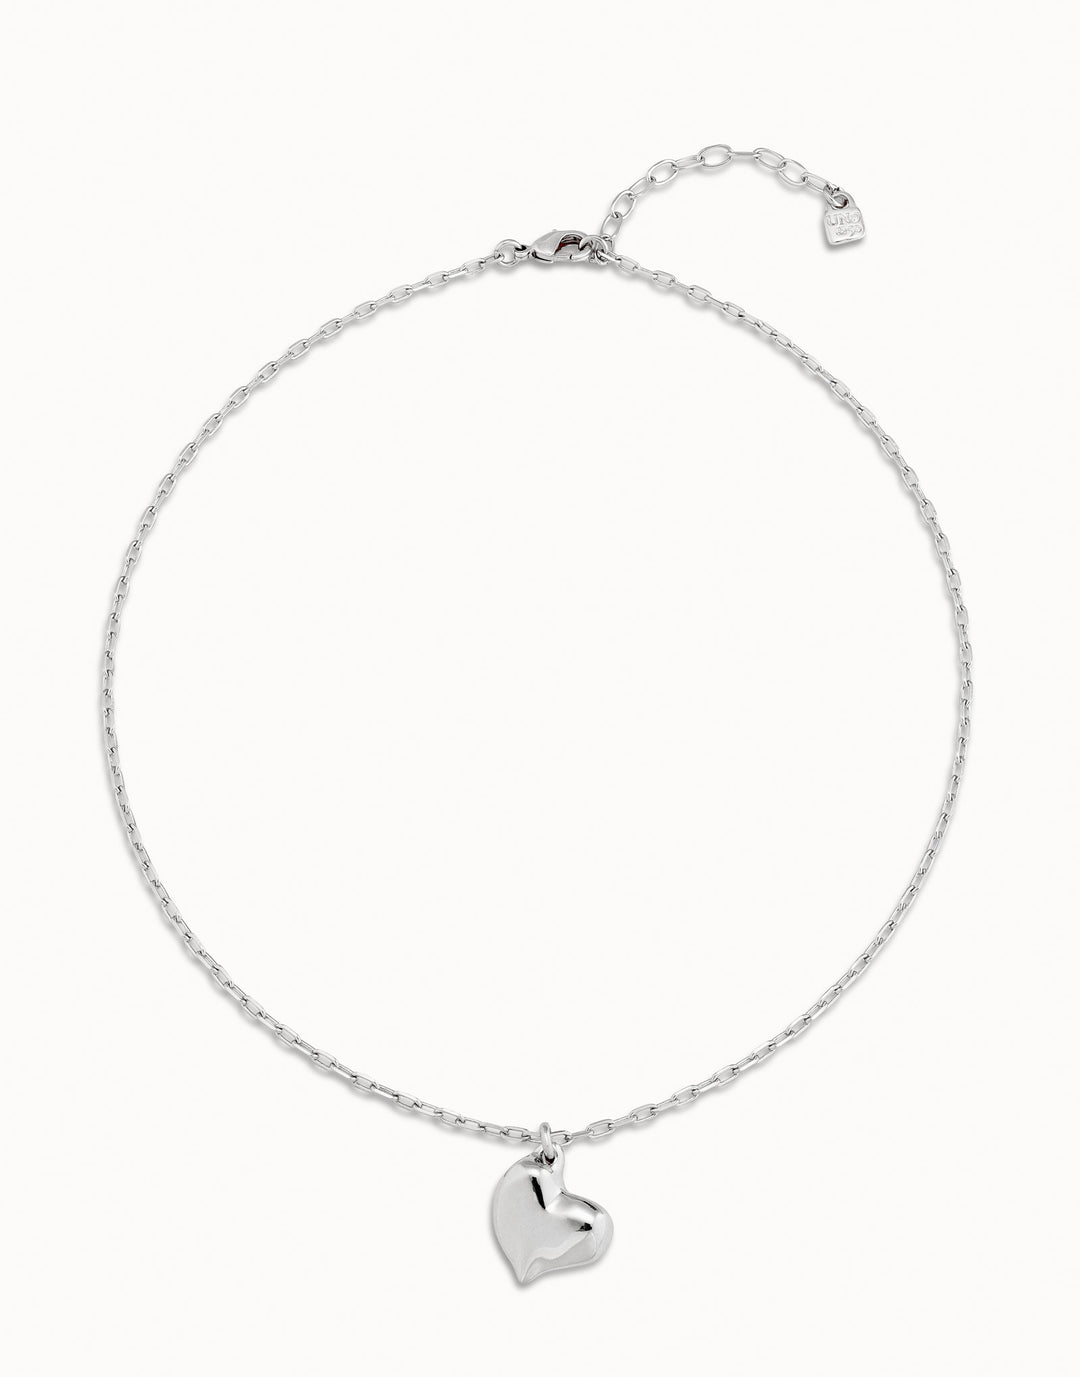 FOREVER NECKLACE - SILVER